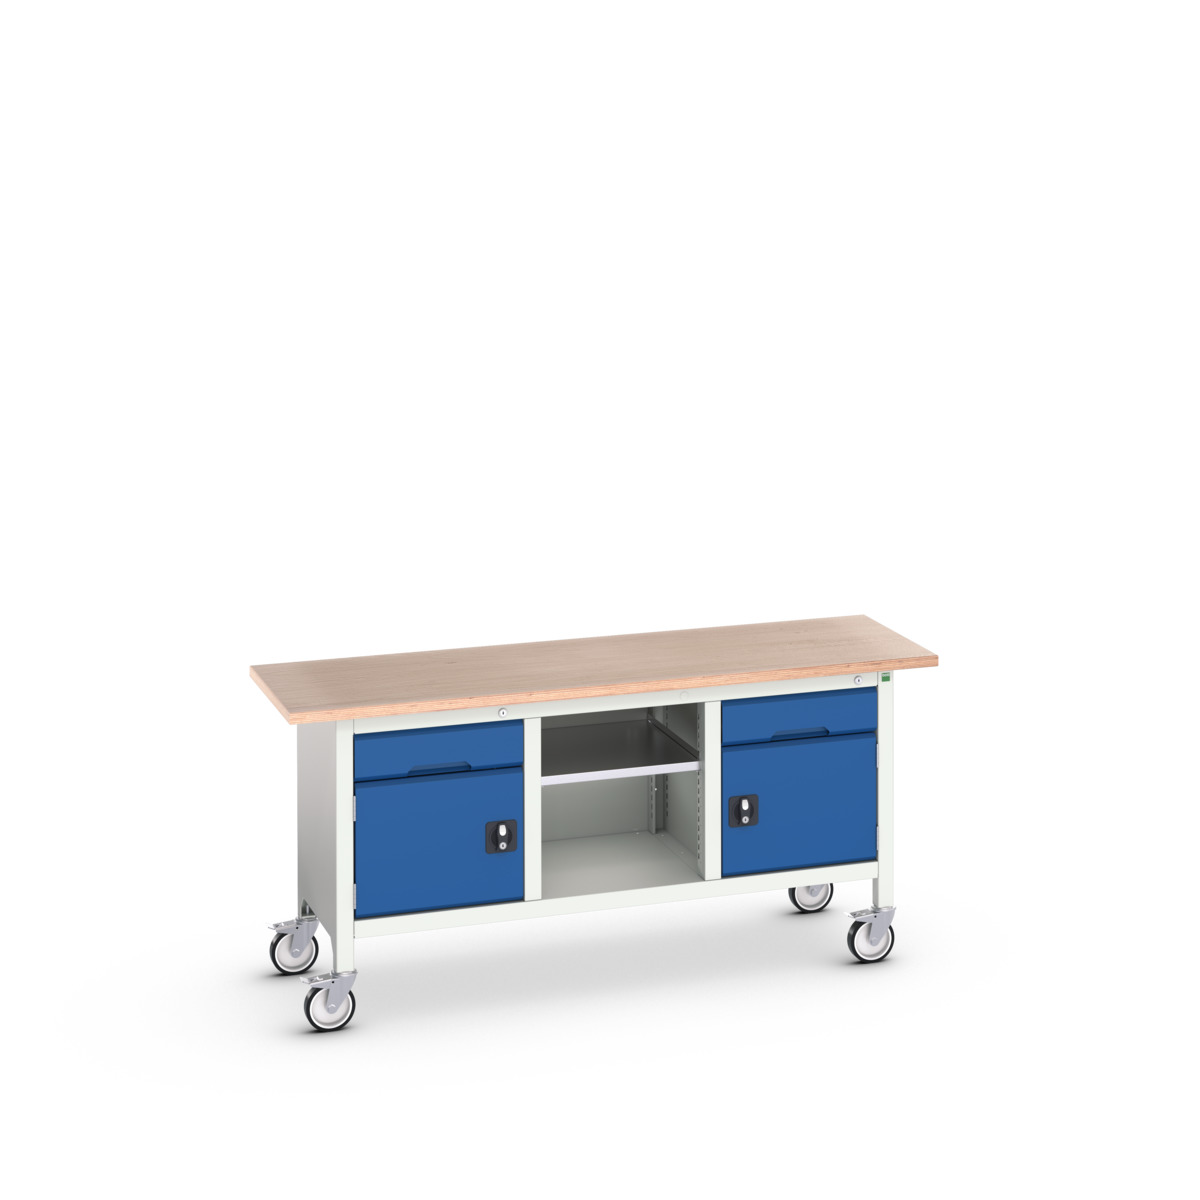 16923221.11 - verso mobile storage bench (mpx)